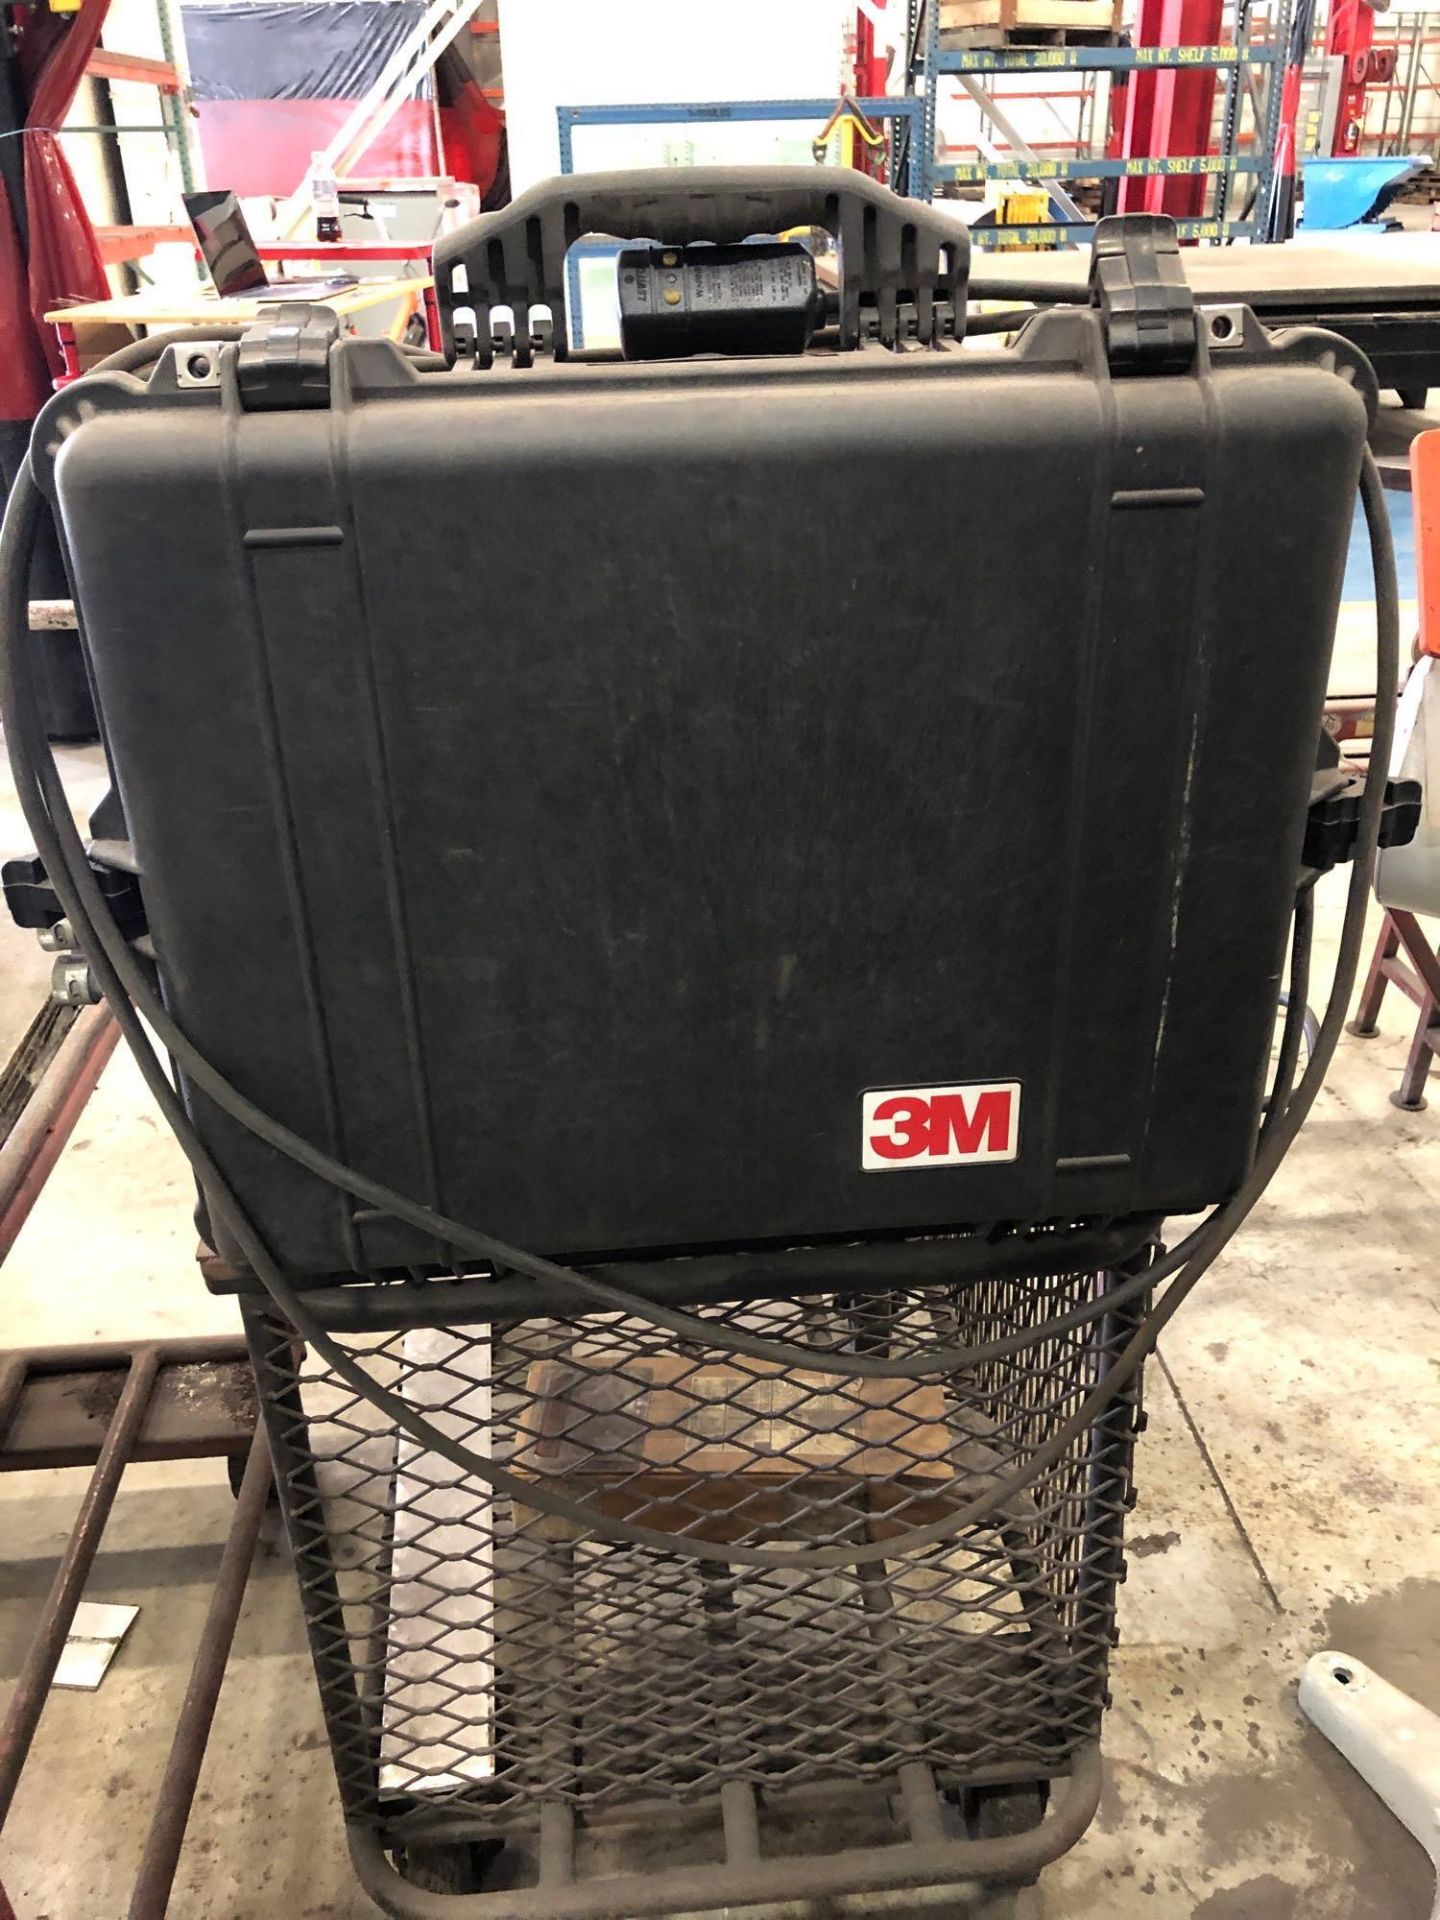 Steel Roll Around Cart w/ 3M Model: 5700 Co Monitor Air Purification System - Image 8 of 28